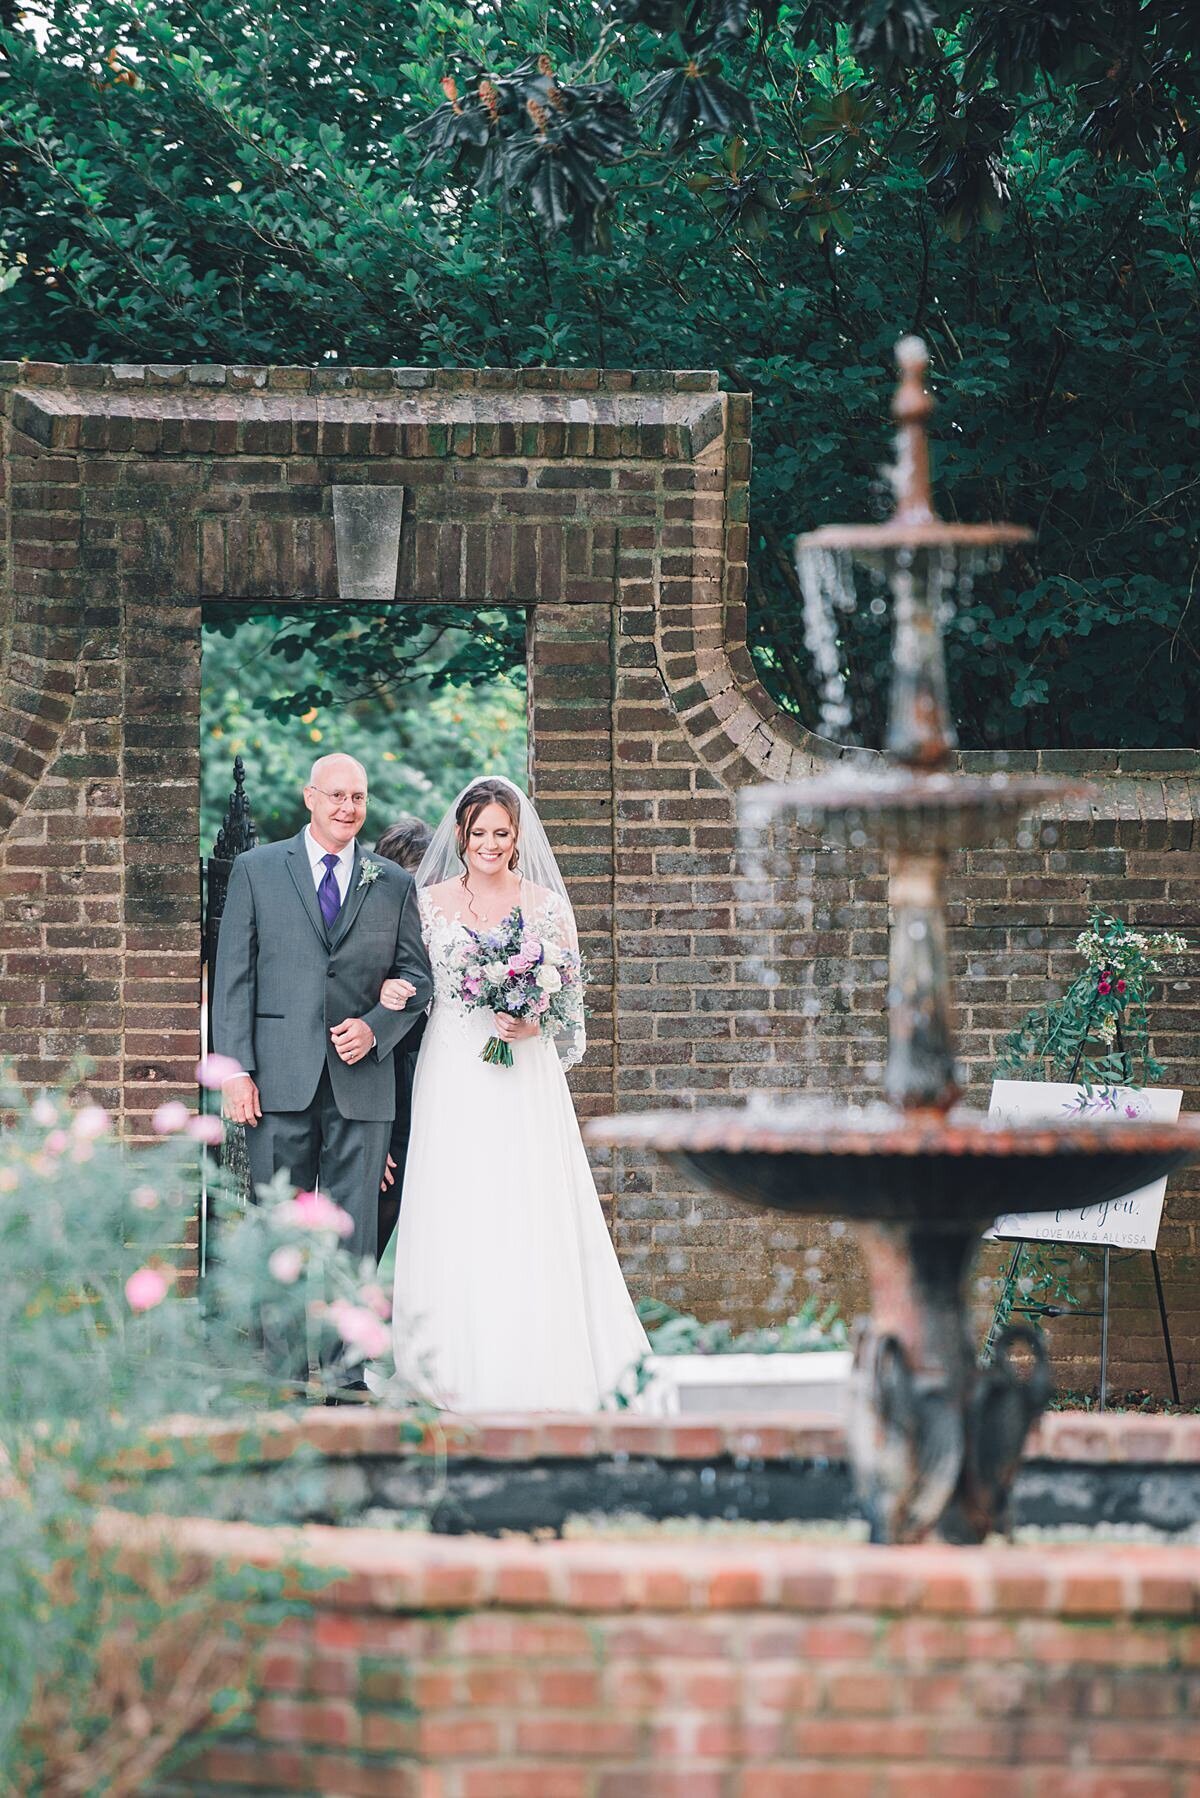 A bride wearing a strapless wedding dress and long veil walks arm in arm  with her father holding a large pink and purple bouquet as they walk through the brick courtyard garden at Rippavilla Plantation towards the three tiered fountain.